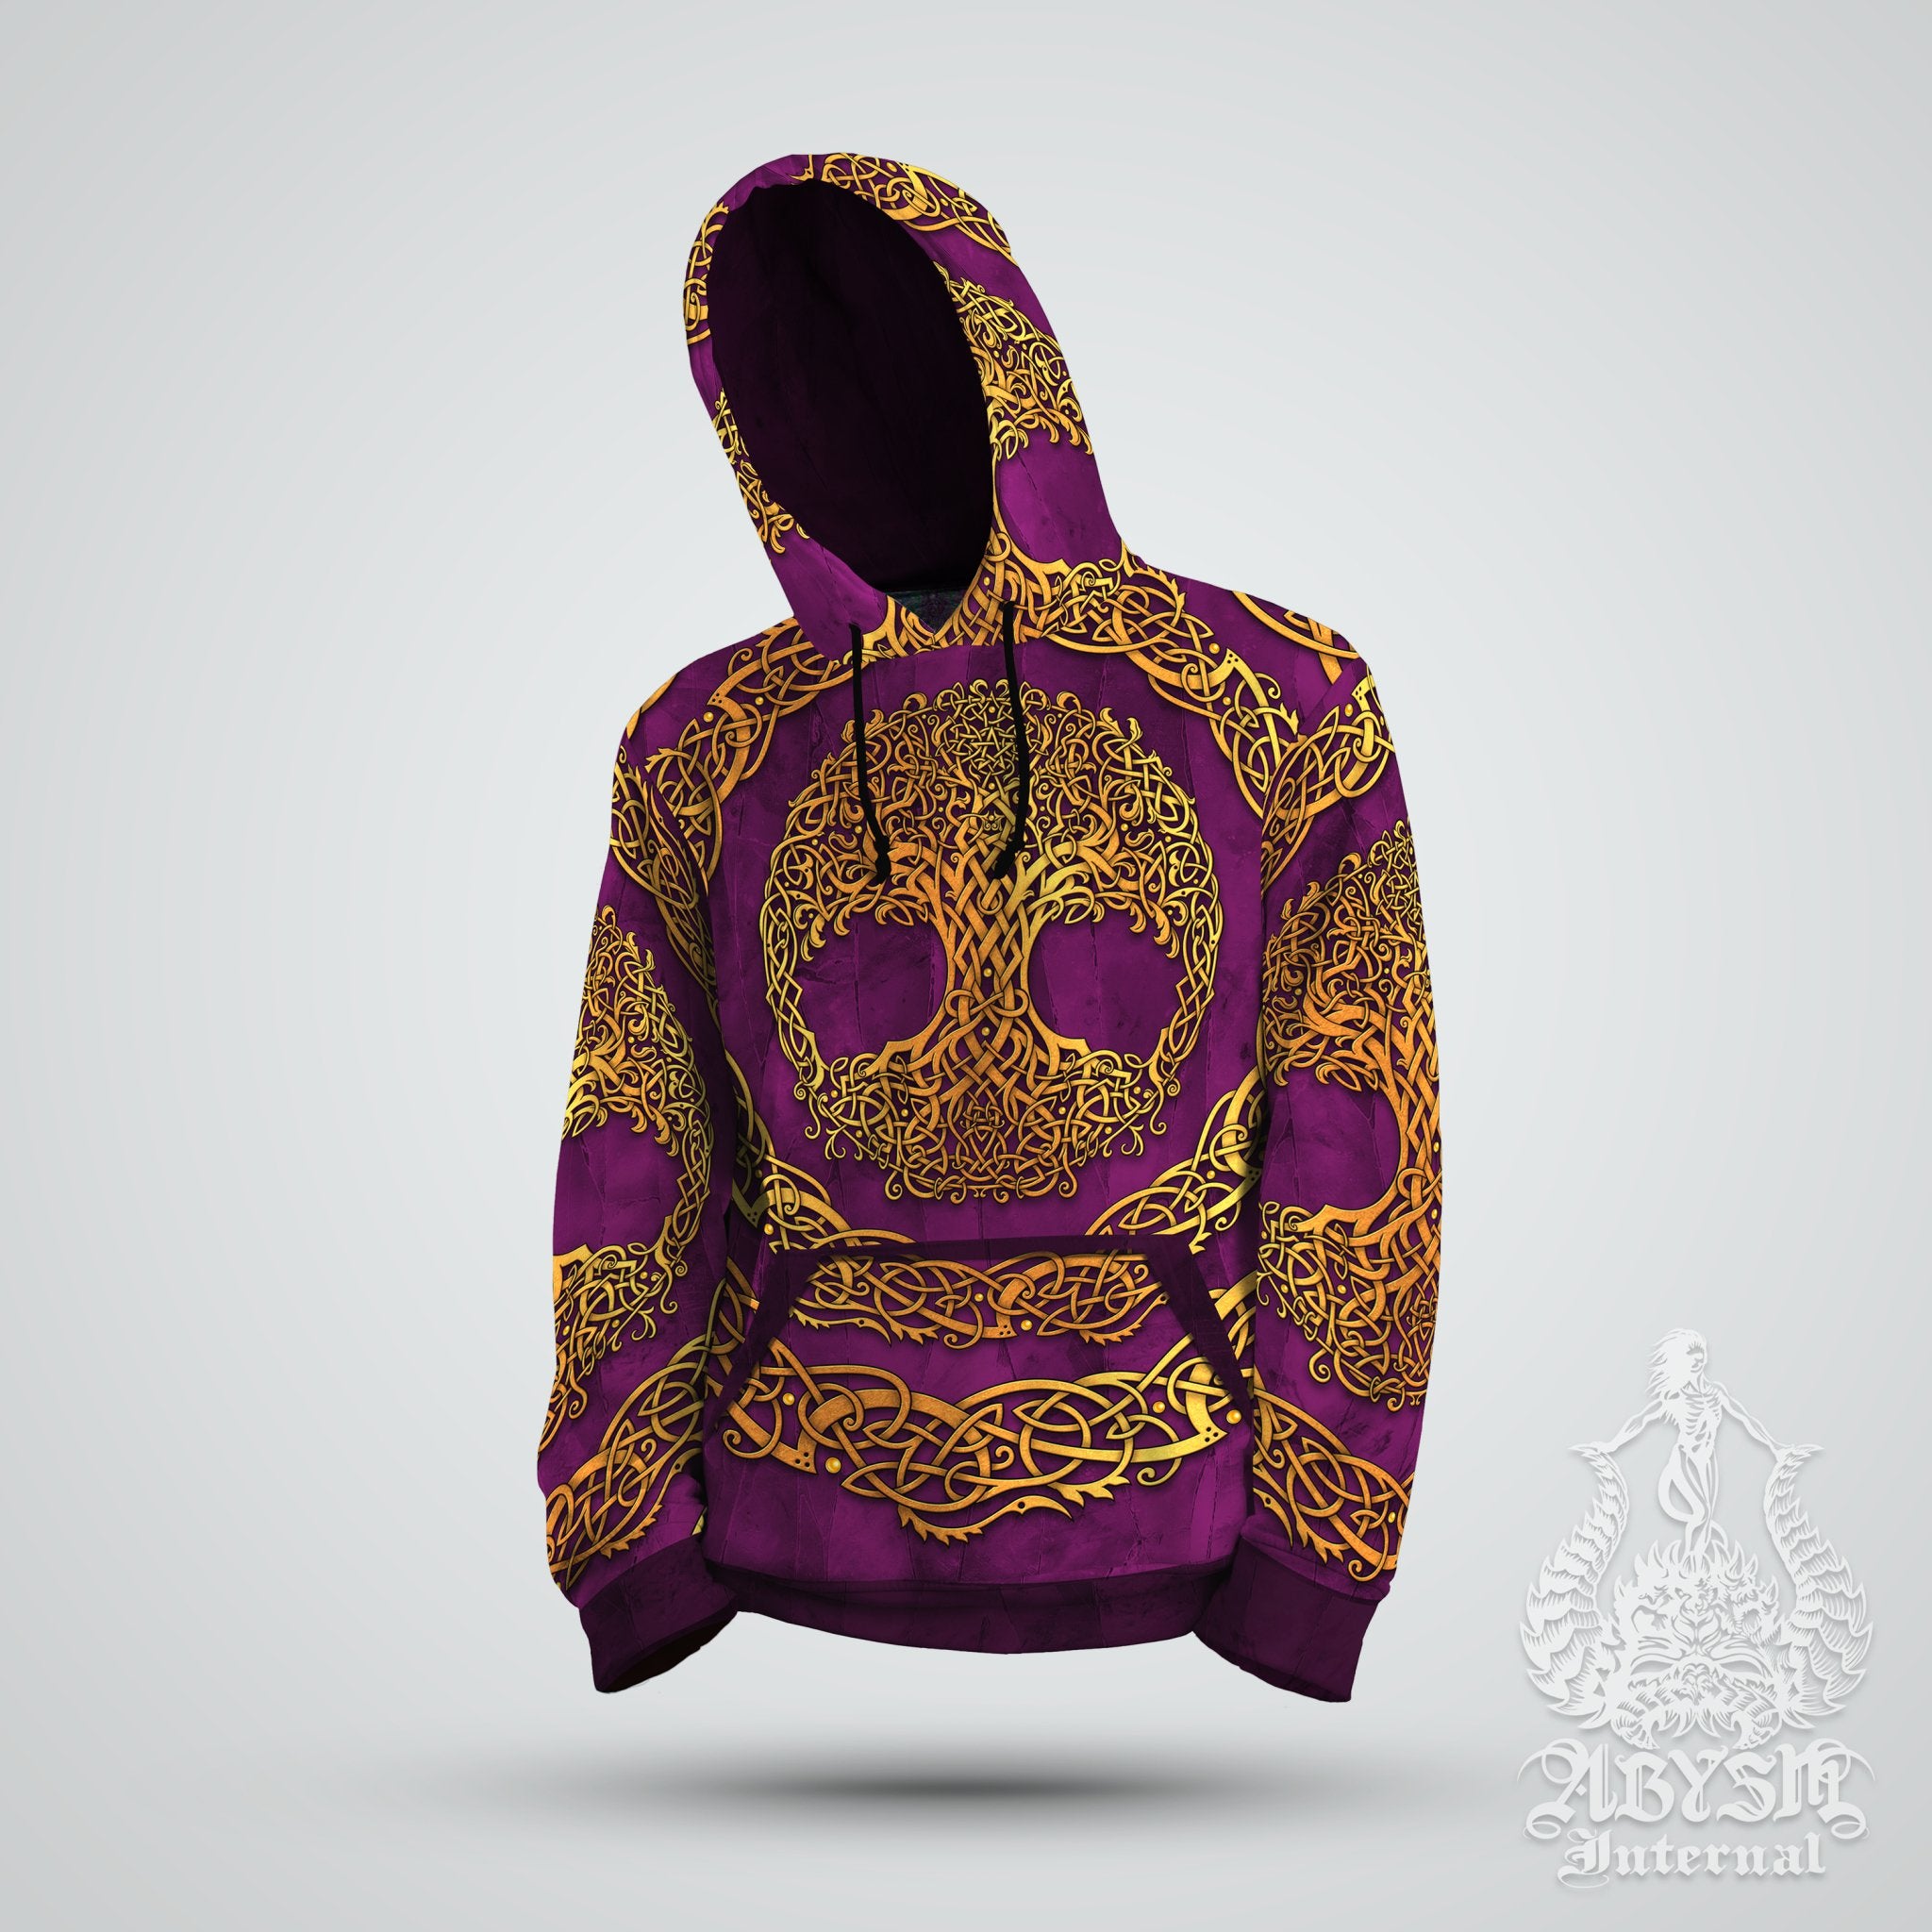 Gold Tree of Life Sweater, Indie Pullover, Boho Outfit, Witchy Hoodie, Celtic Streetwear, Alternative Clothing, Unisex - Black, Green or Purple, 3 Colors - Abysm Internal